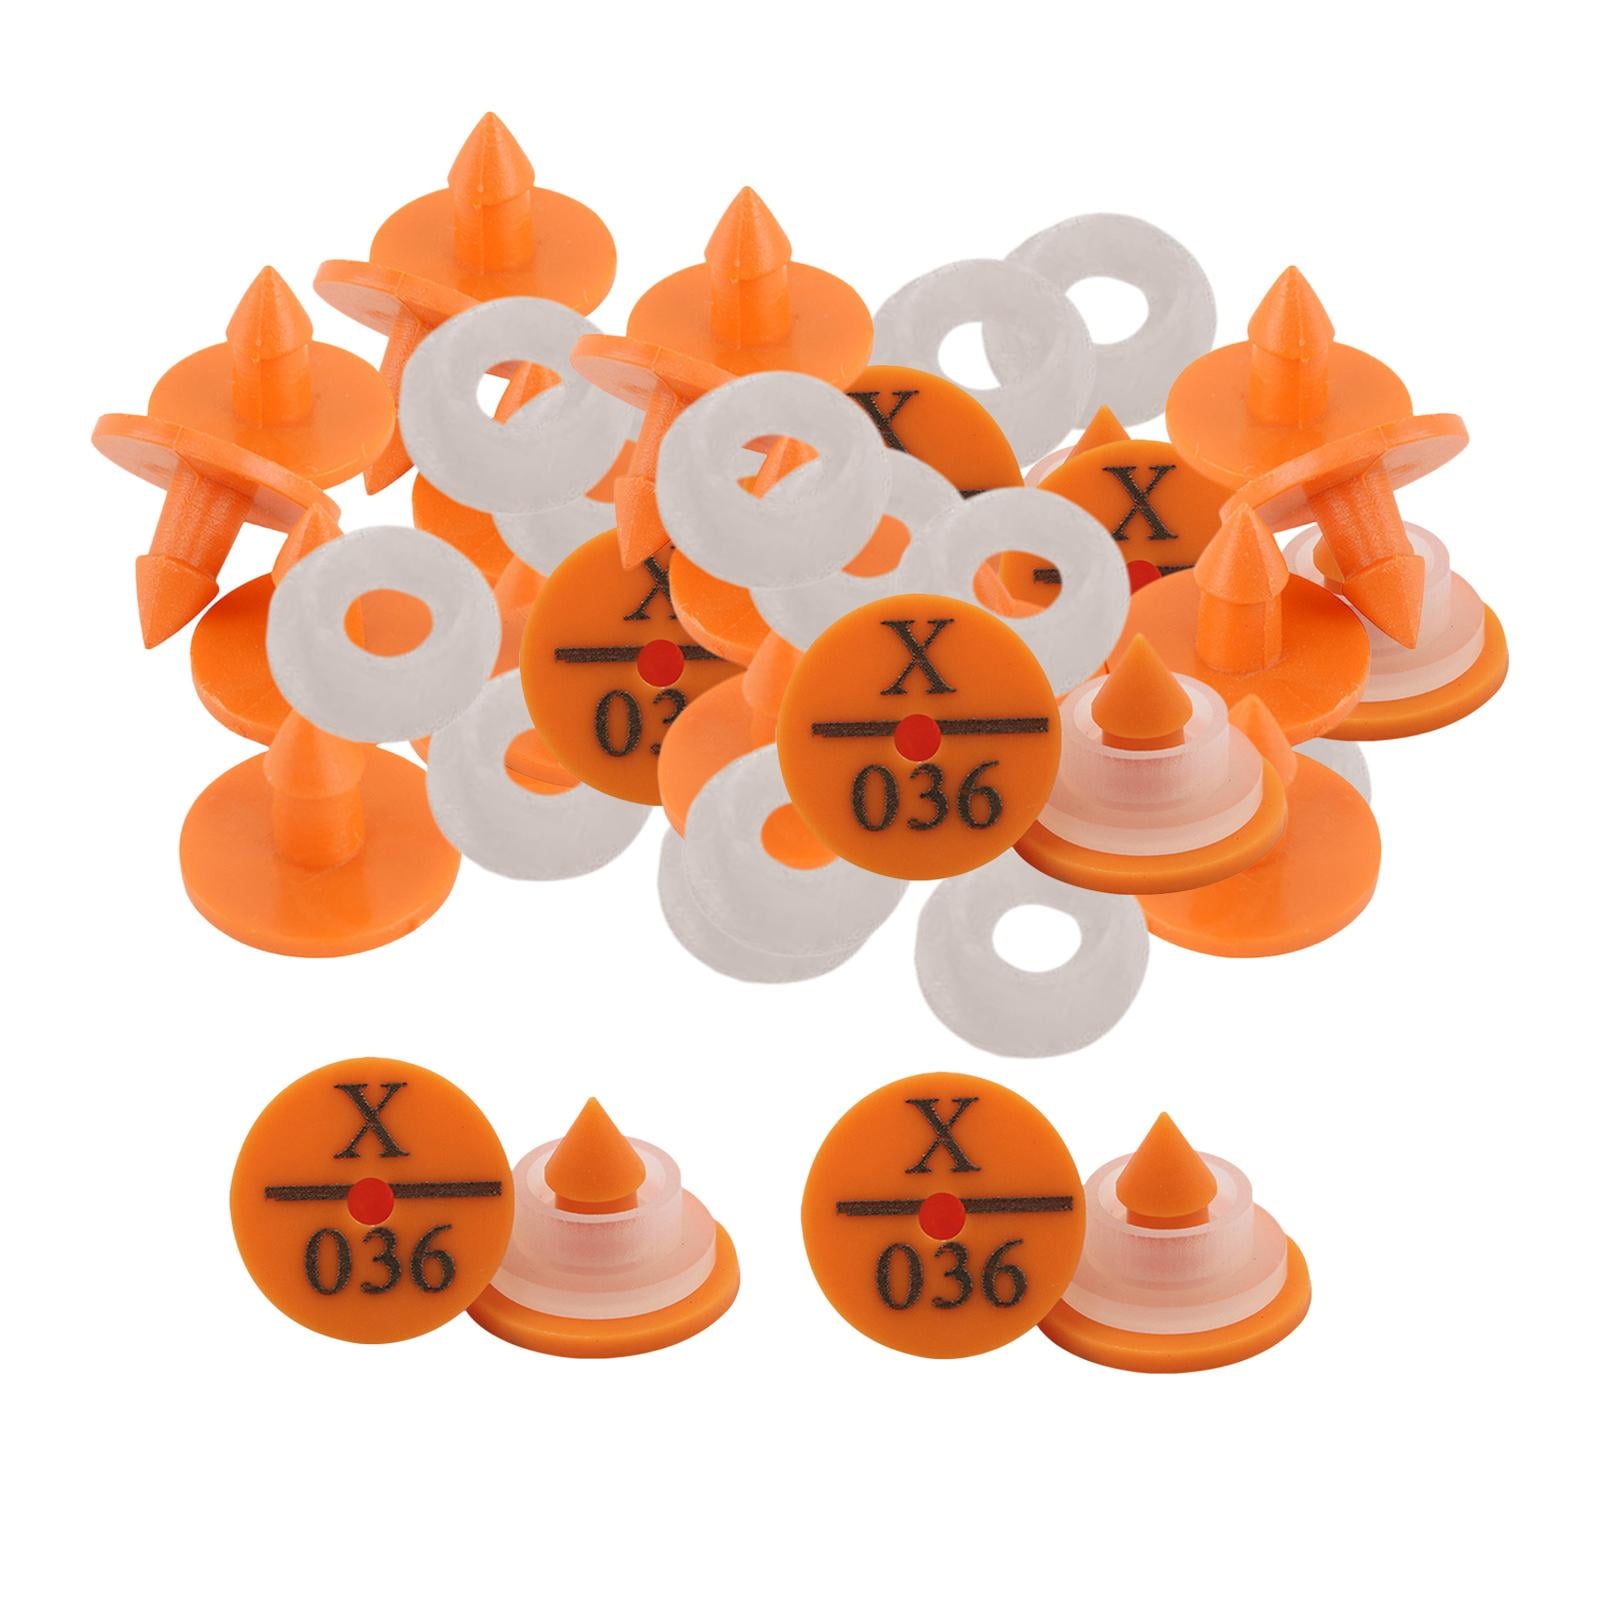 100PCS Pre Numbered Livestock Ear Tags for Pig Goat Sheep Tagging Orange 